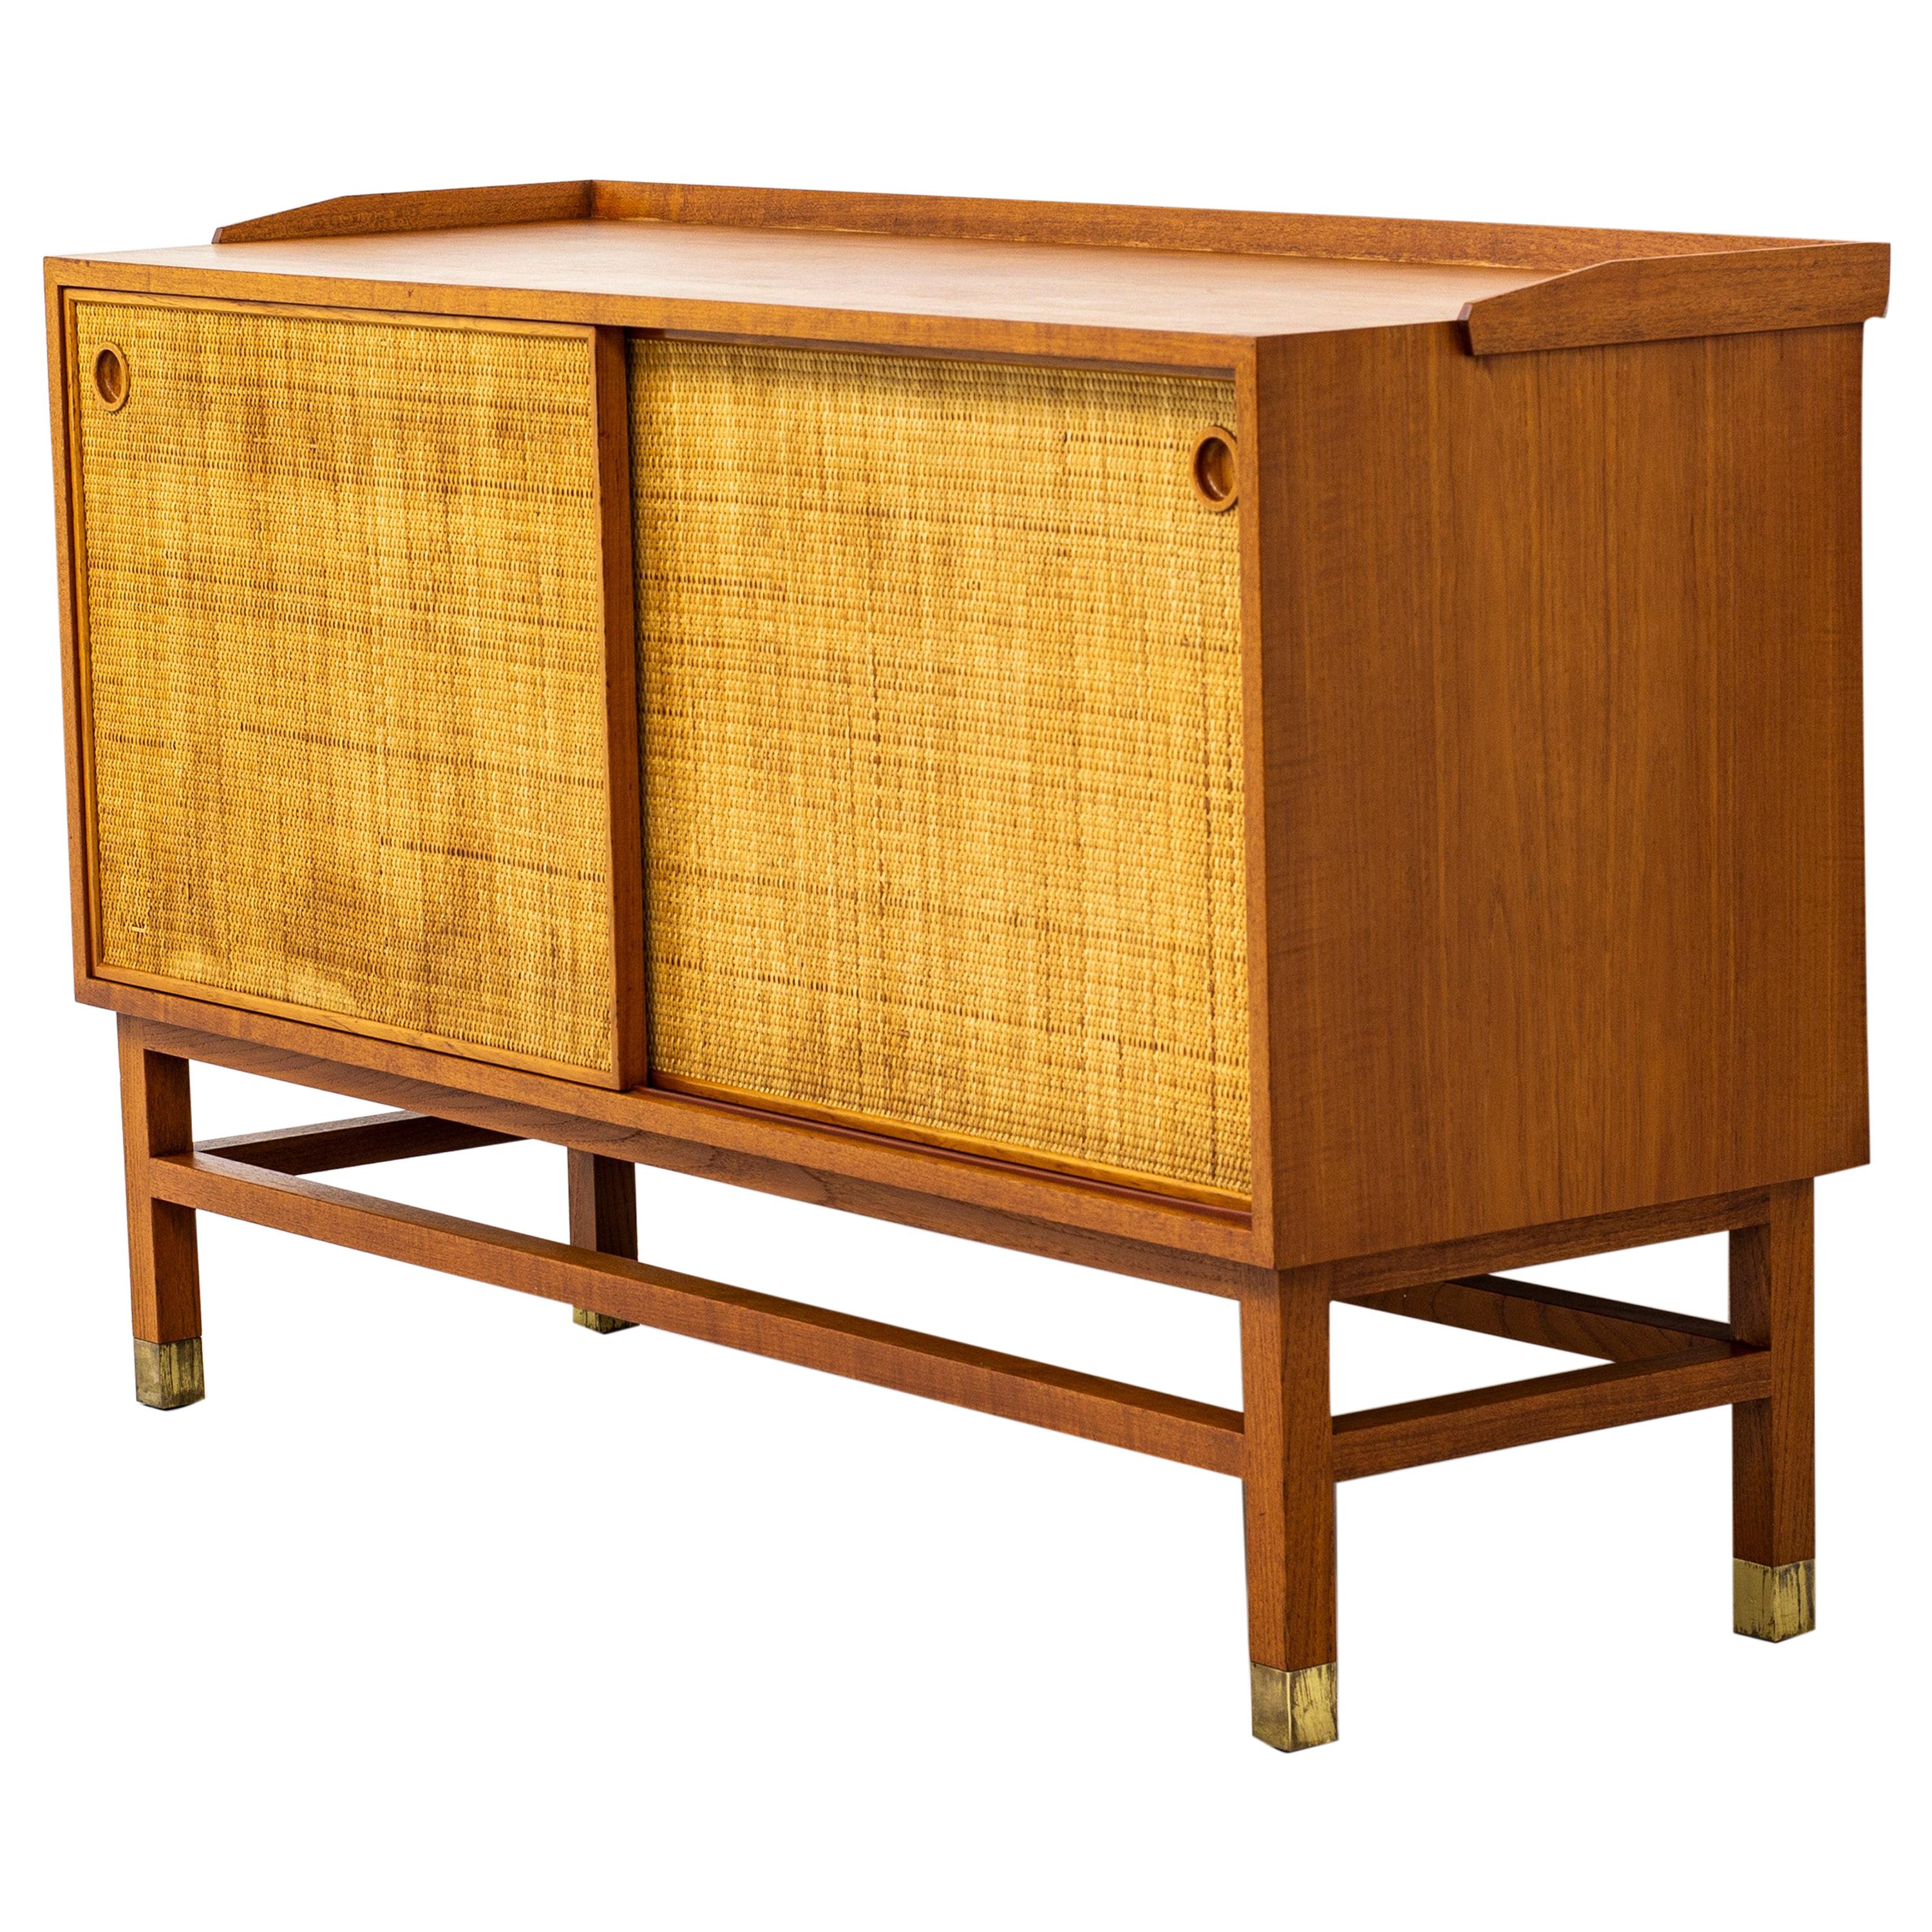 Sideboard with Rattan or Cane Doors and Teak Made in Sweden, 1950s